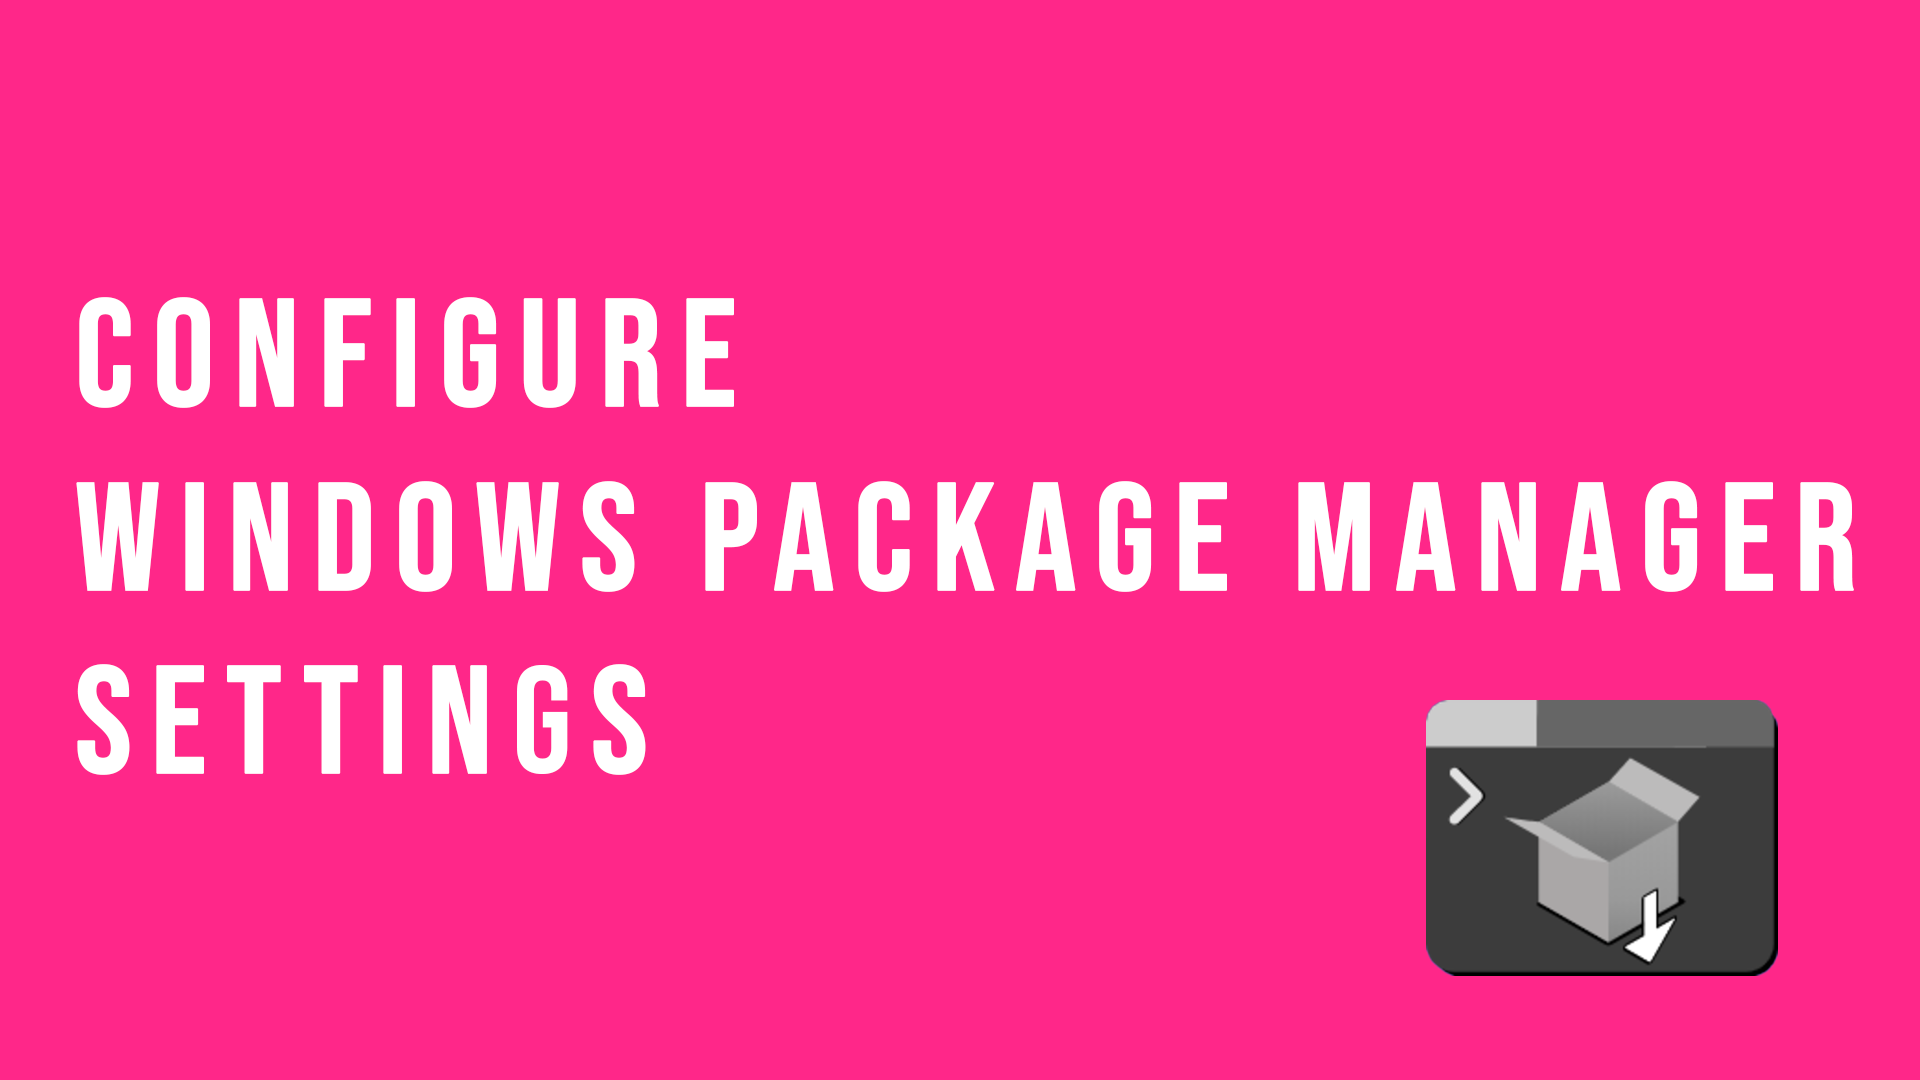 The Windows Package Manager is a great tool that can help you install packages (software/applications) and manage those packages by helping to update 